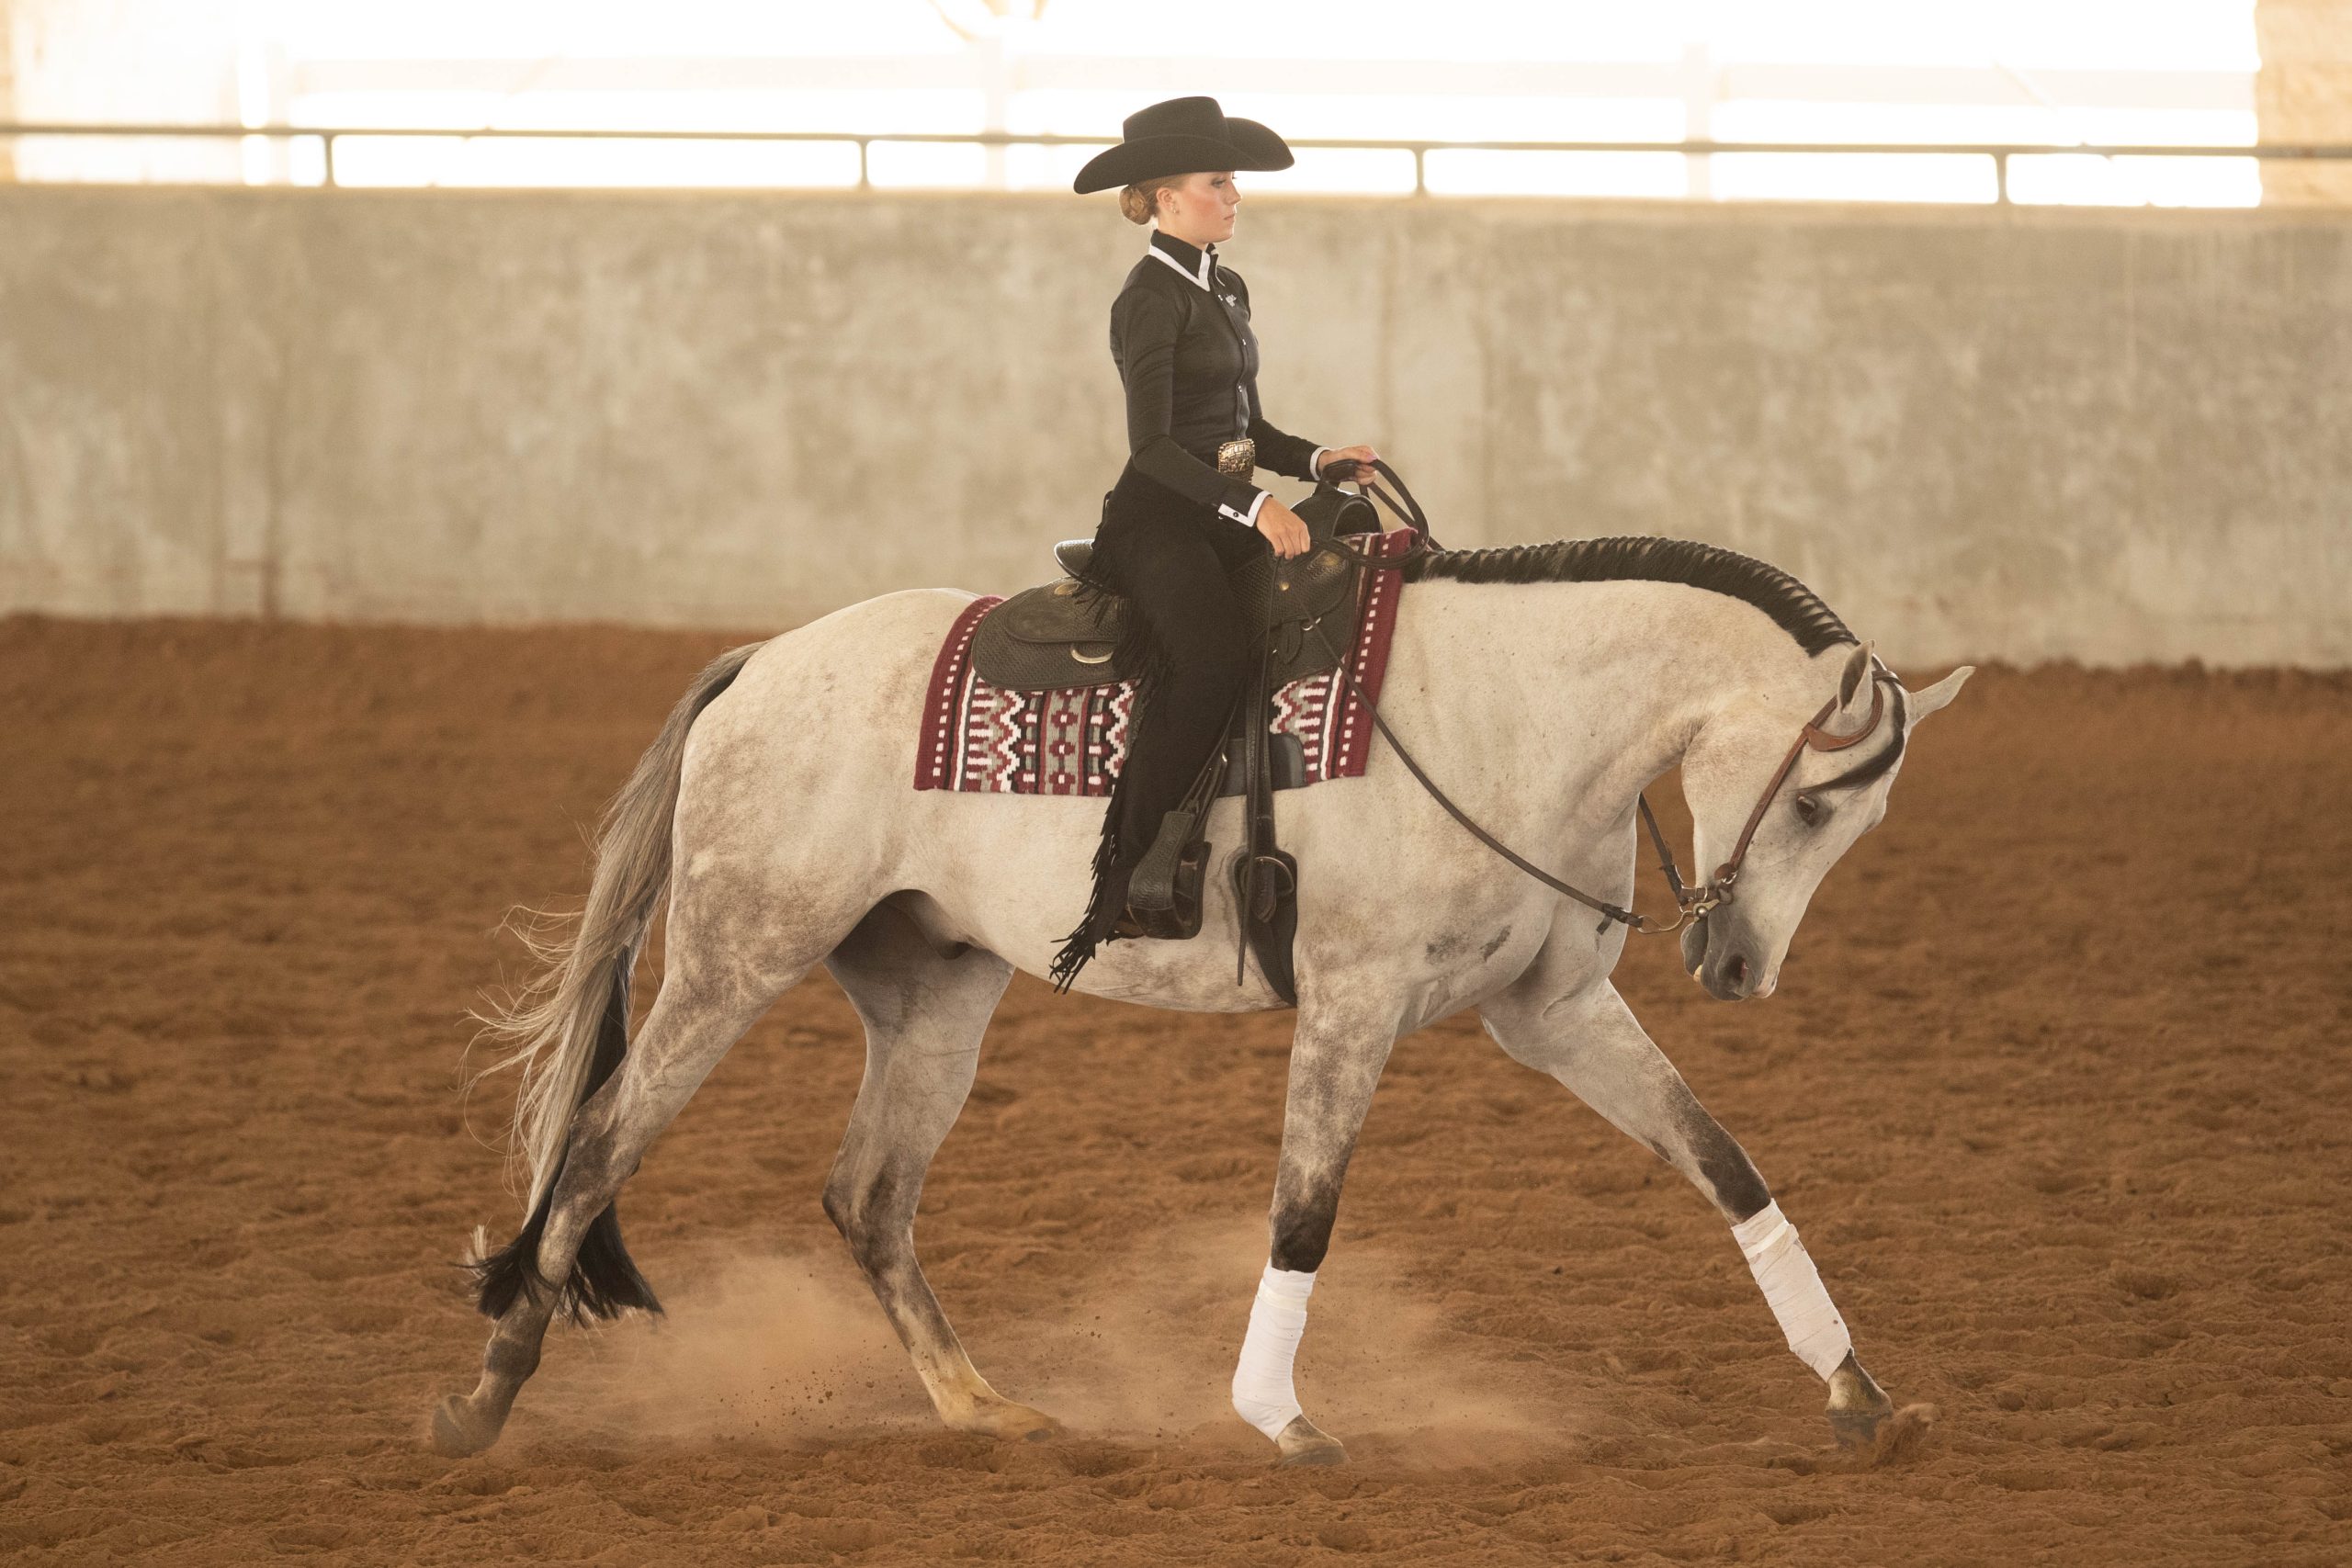 GALLERY%3A+Equestrian+Maroon+%26+White+Scrimmage